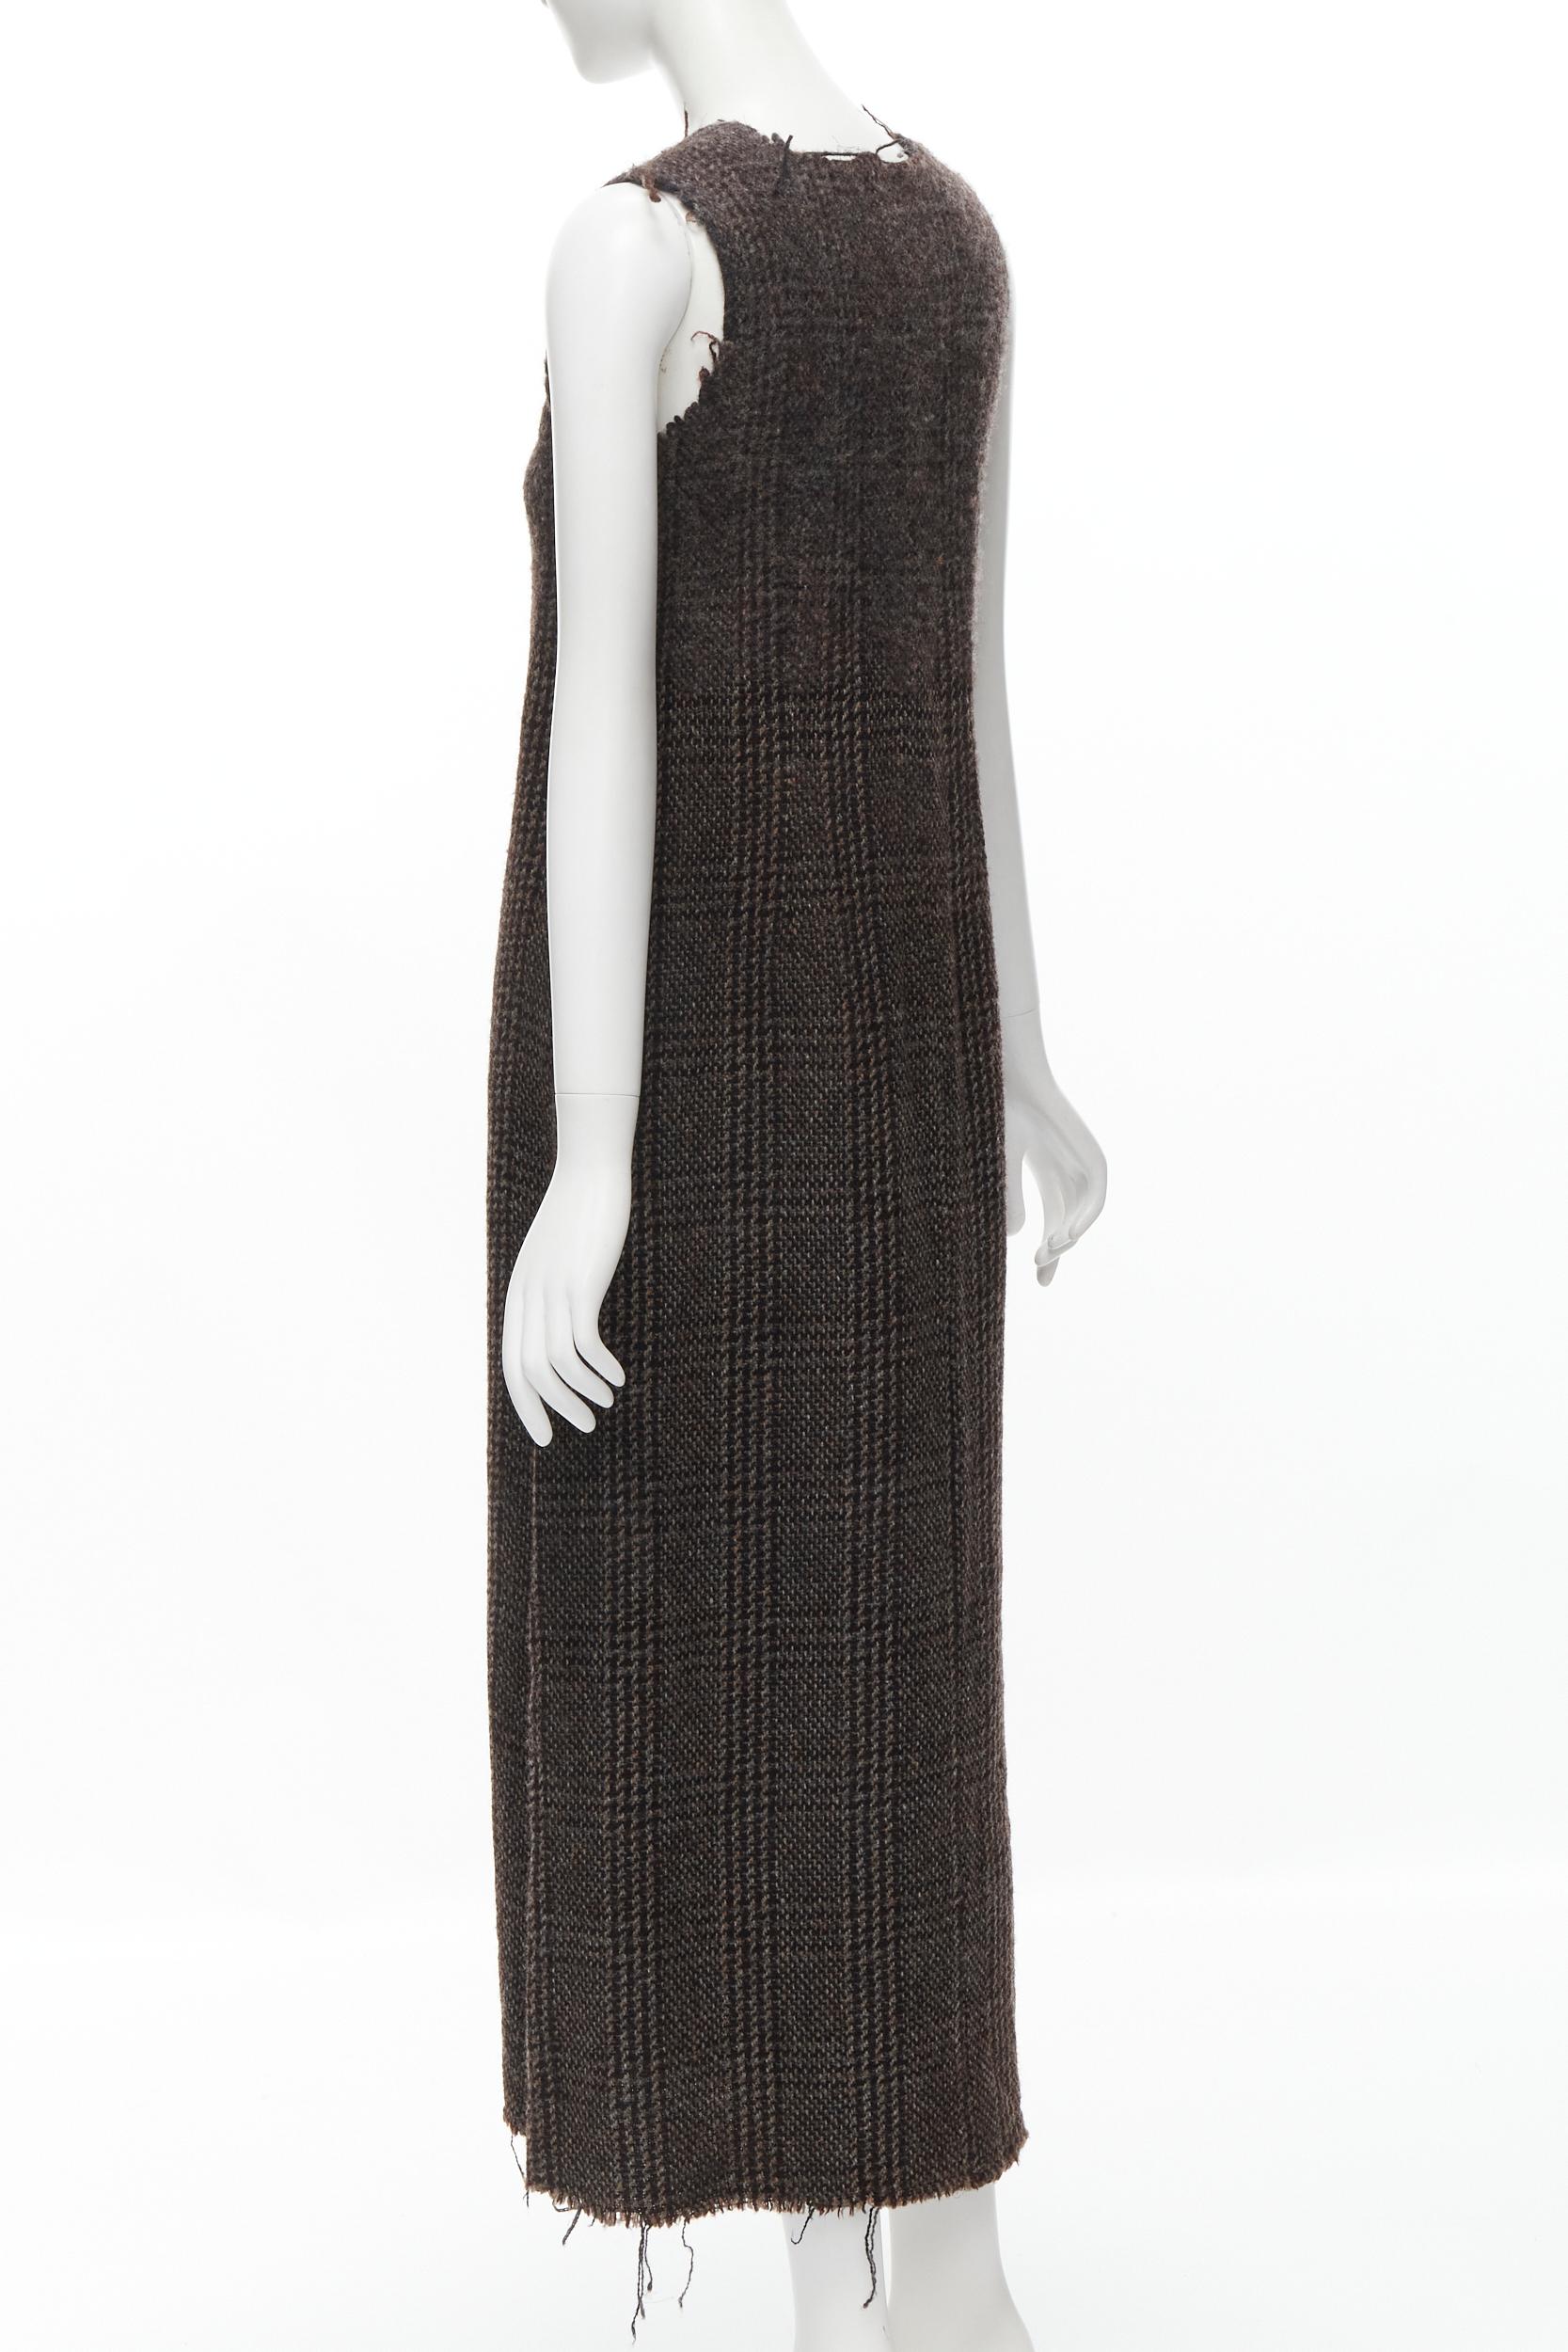 COMME DES GARCONS Vintage 1994 check boiled wool tweed raw frayed midi dress M For Sale 1